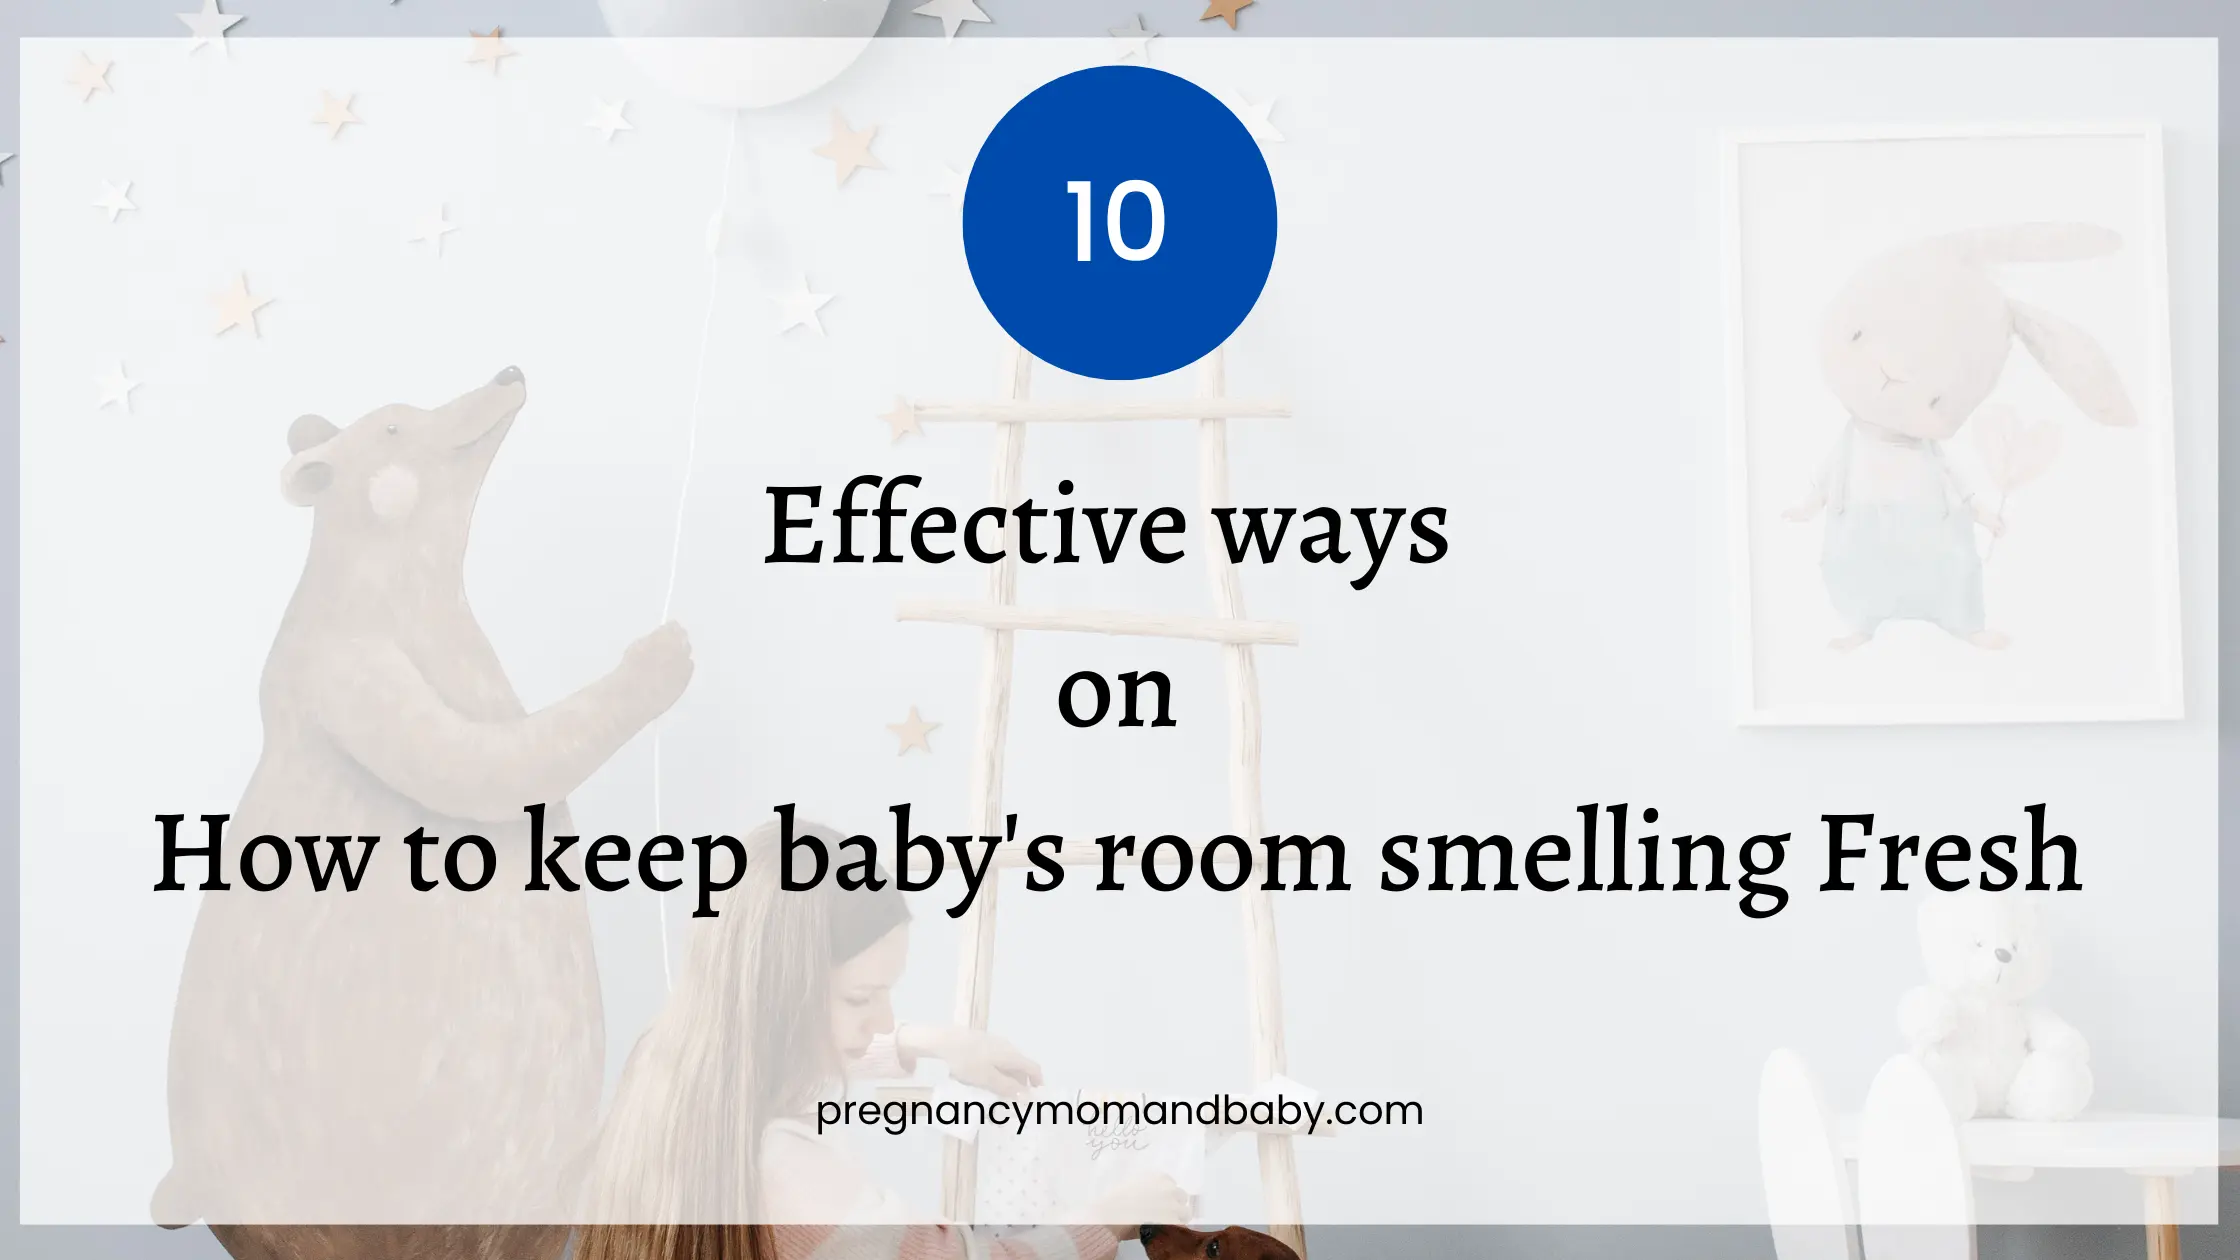 How to keep baby’s room smelling fresh